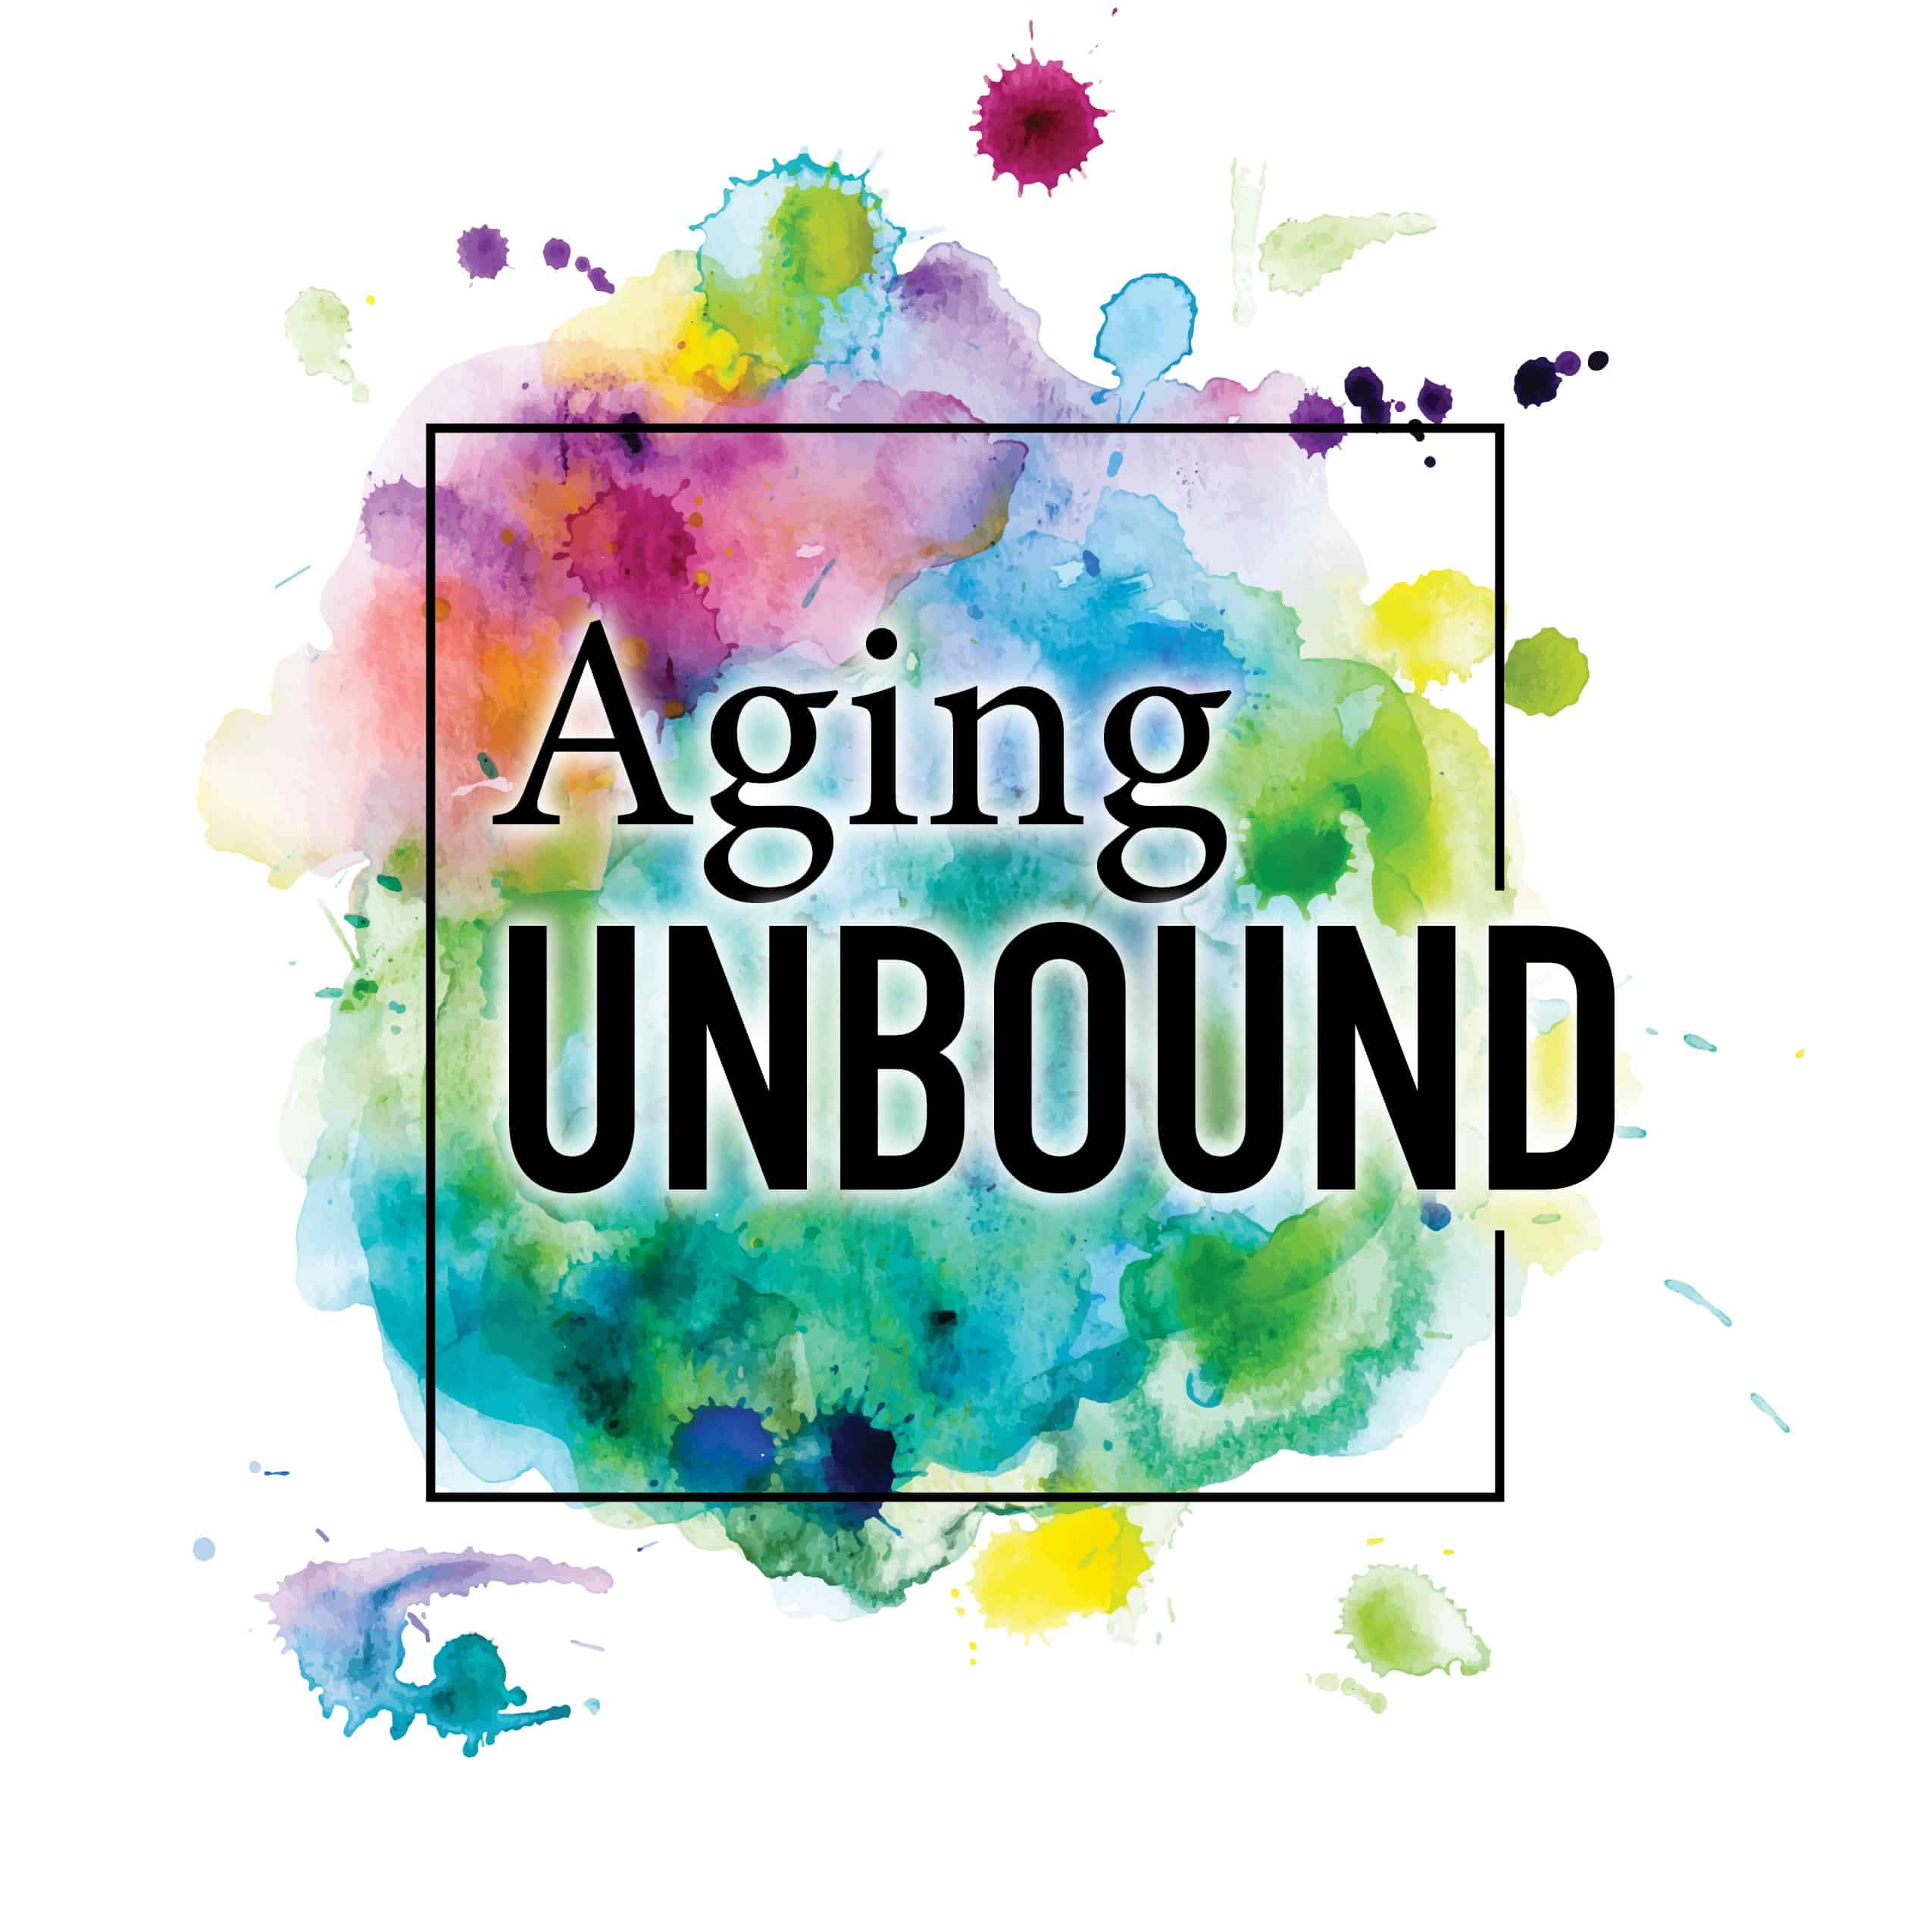 Watercolor blotches with "Aging Unbound" in the center.